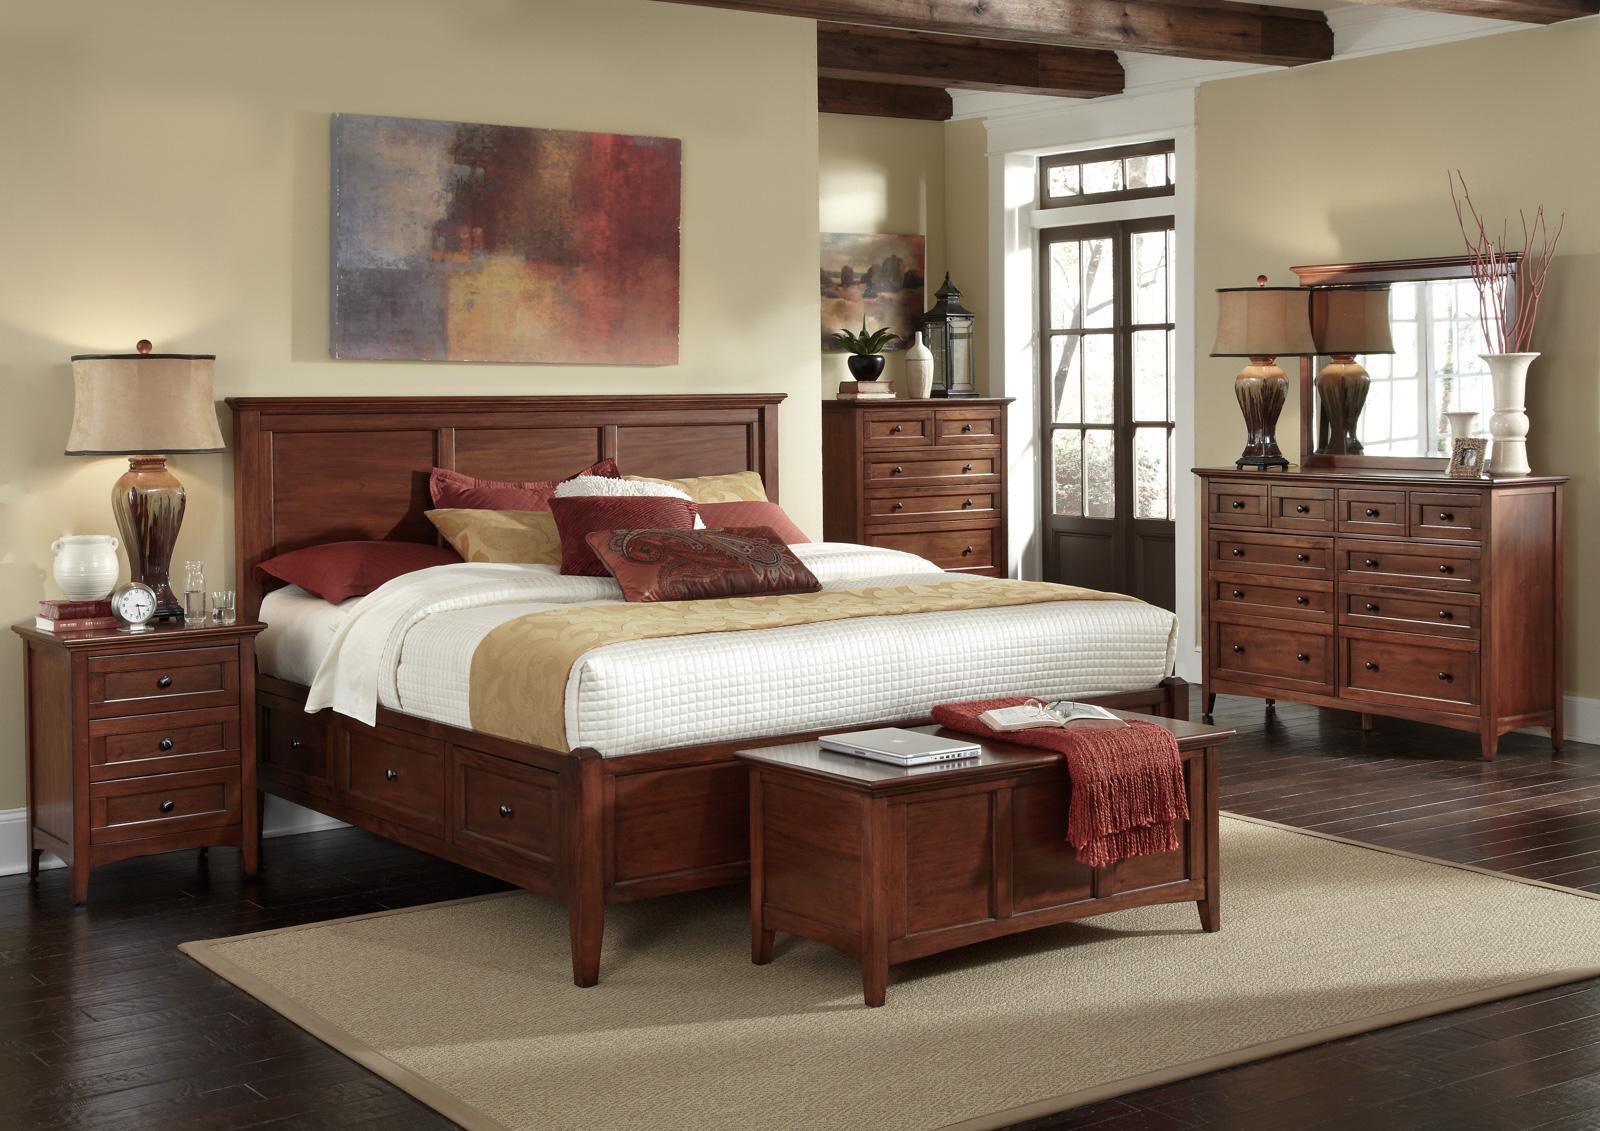 

    
Traditional Queen Storage Bedroom Set 5Pcs WSLCB5091 A-America Westlake
